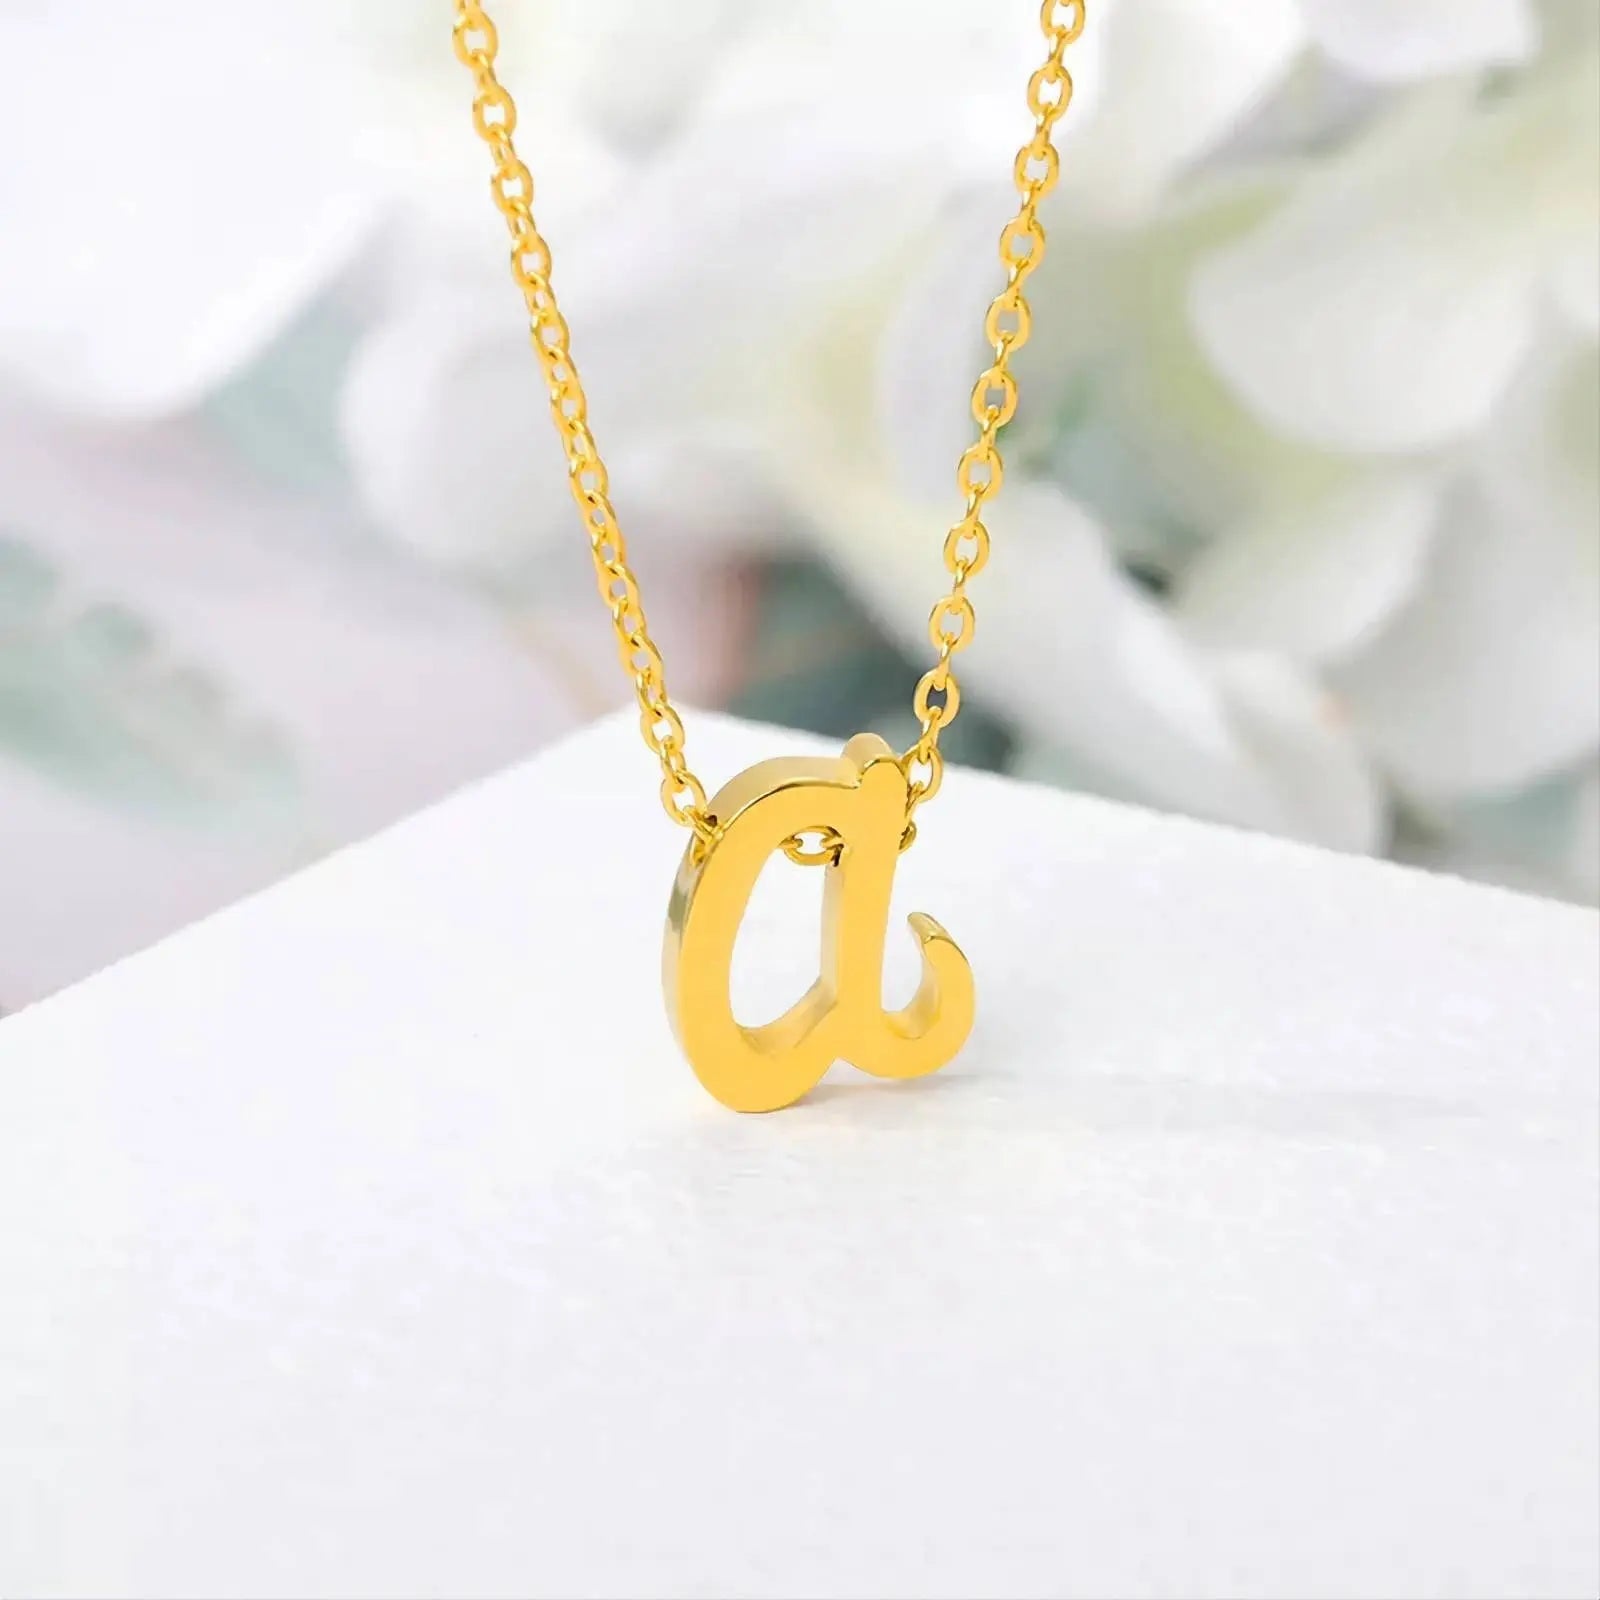 Lowercase Cursive Initial 18k Gold Coin Necklace, Letter Necklace, Monogram Necklace, Initial Circle Necklace For Women Men Gold Pendant JettsJewelers